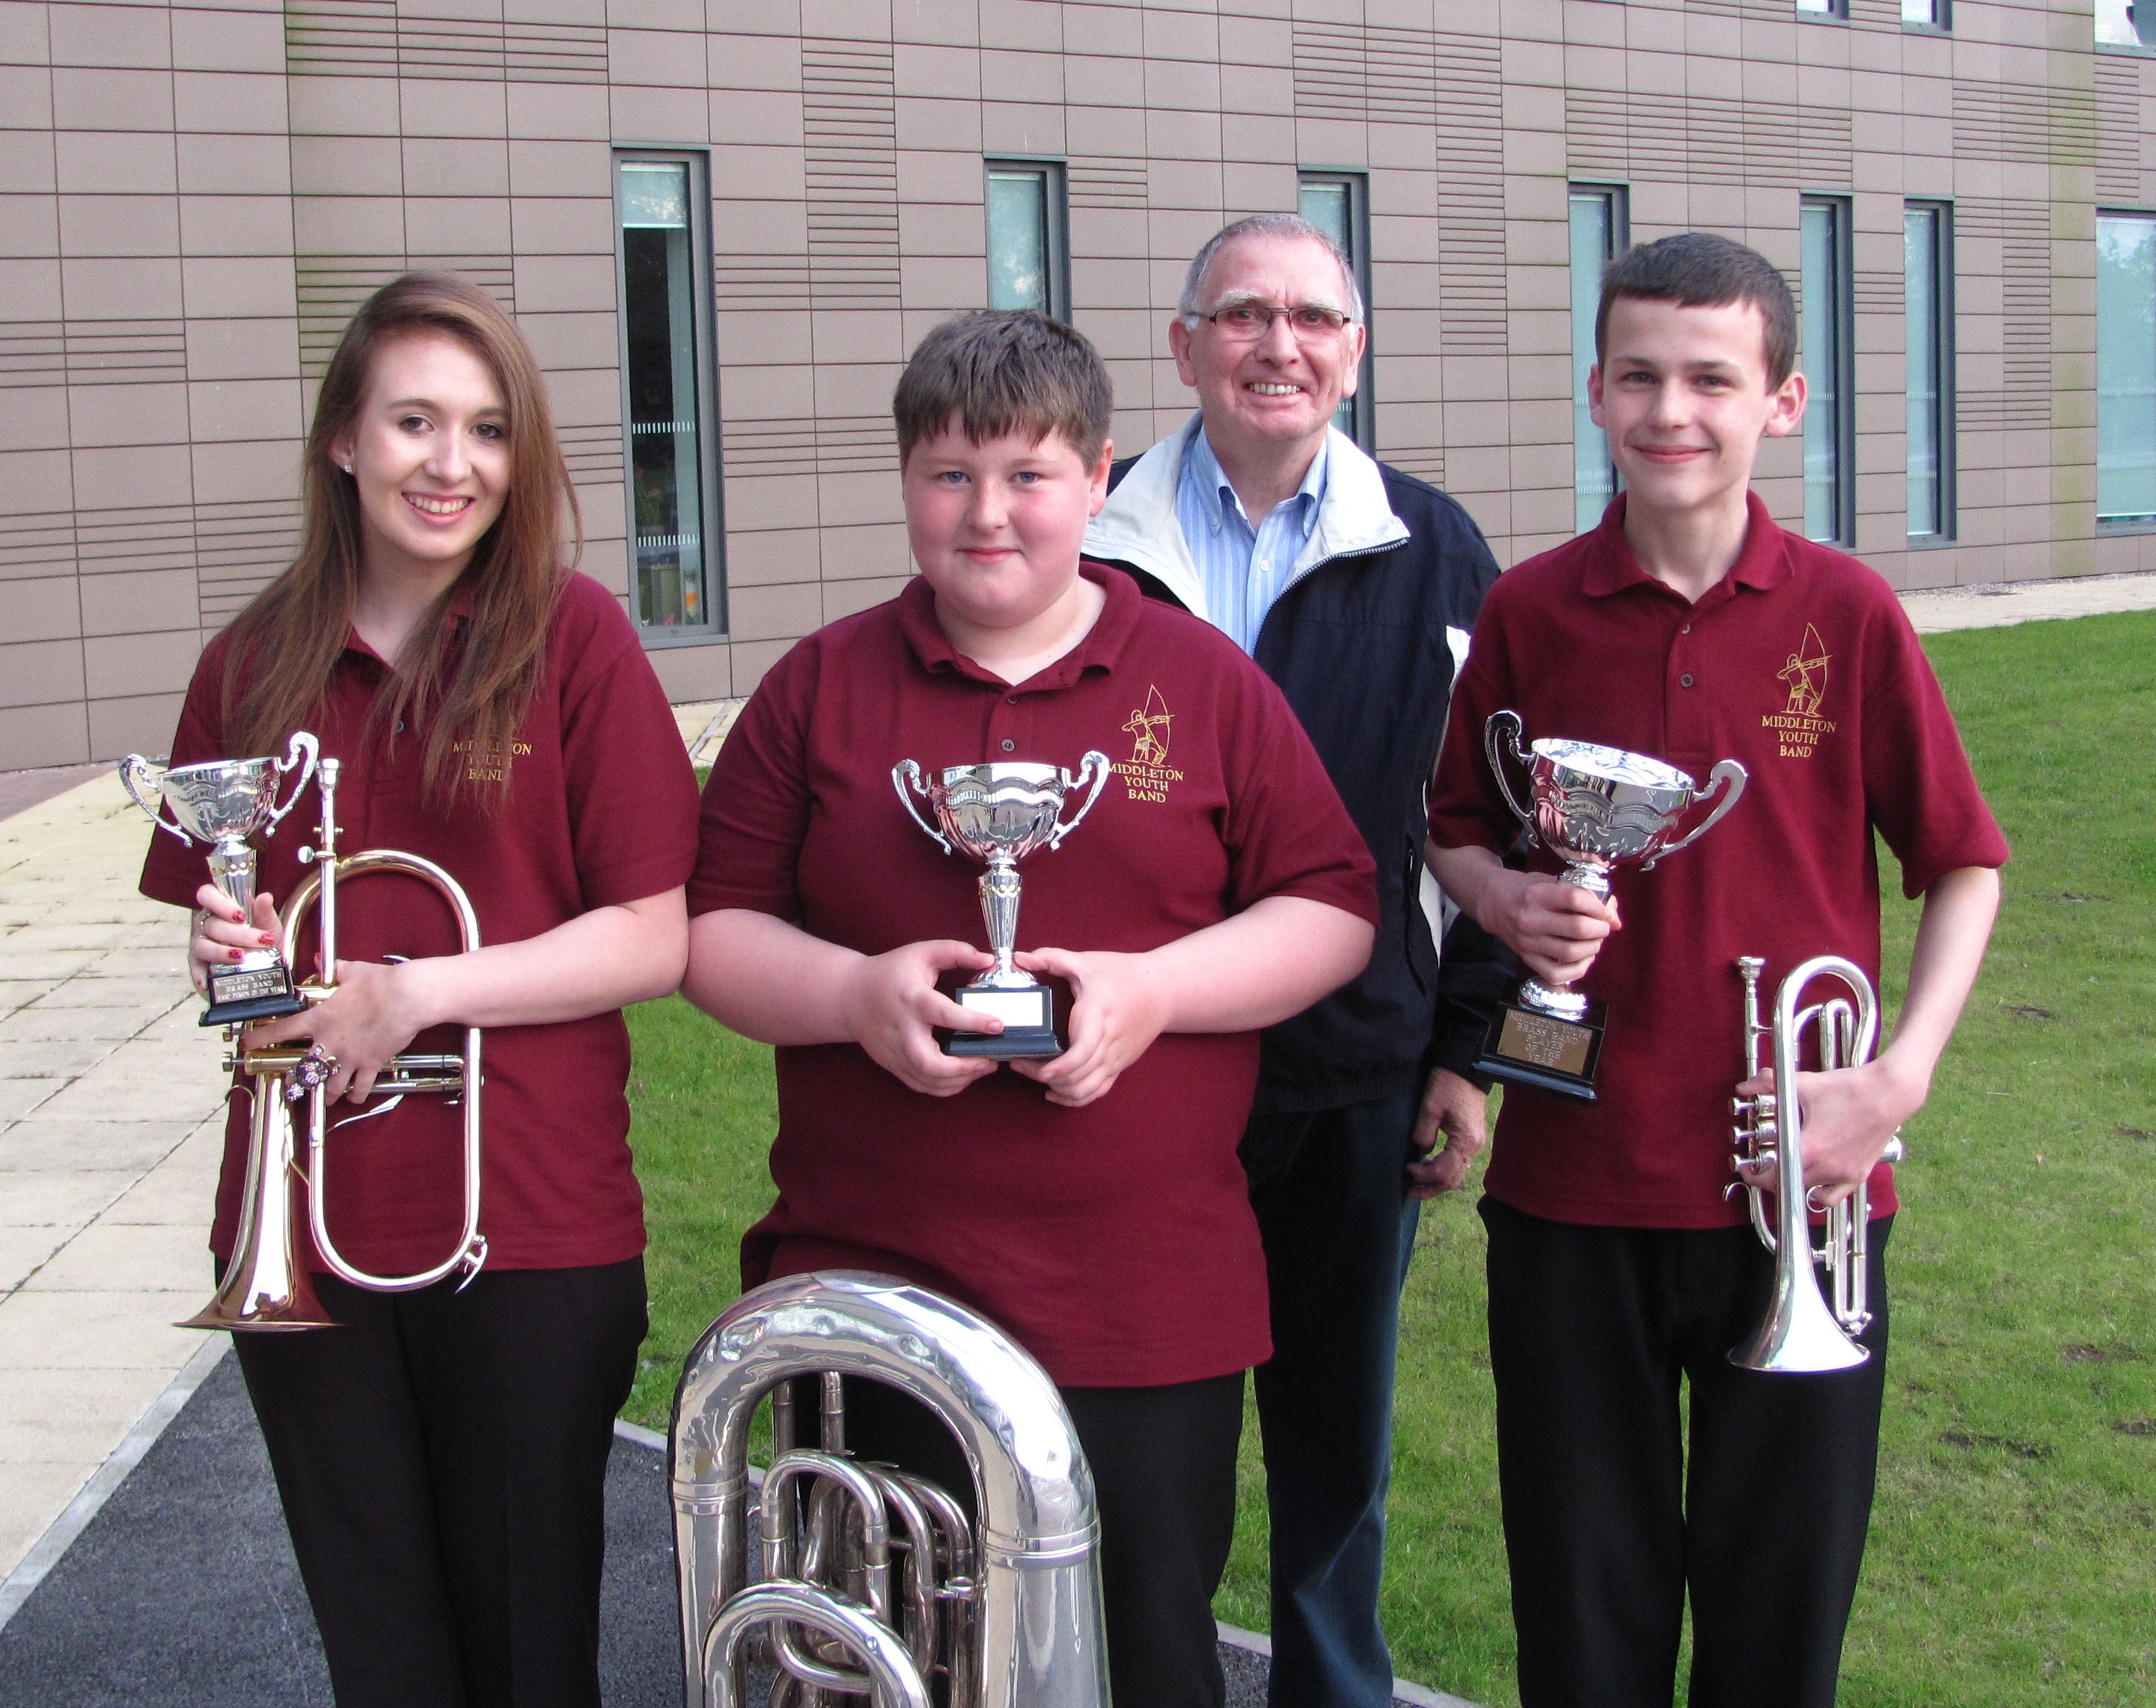 Jenny, Steven and Callum with their awards, presented to them by the band President